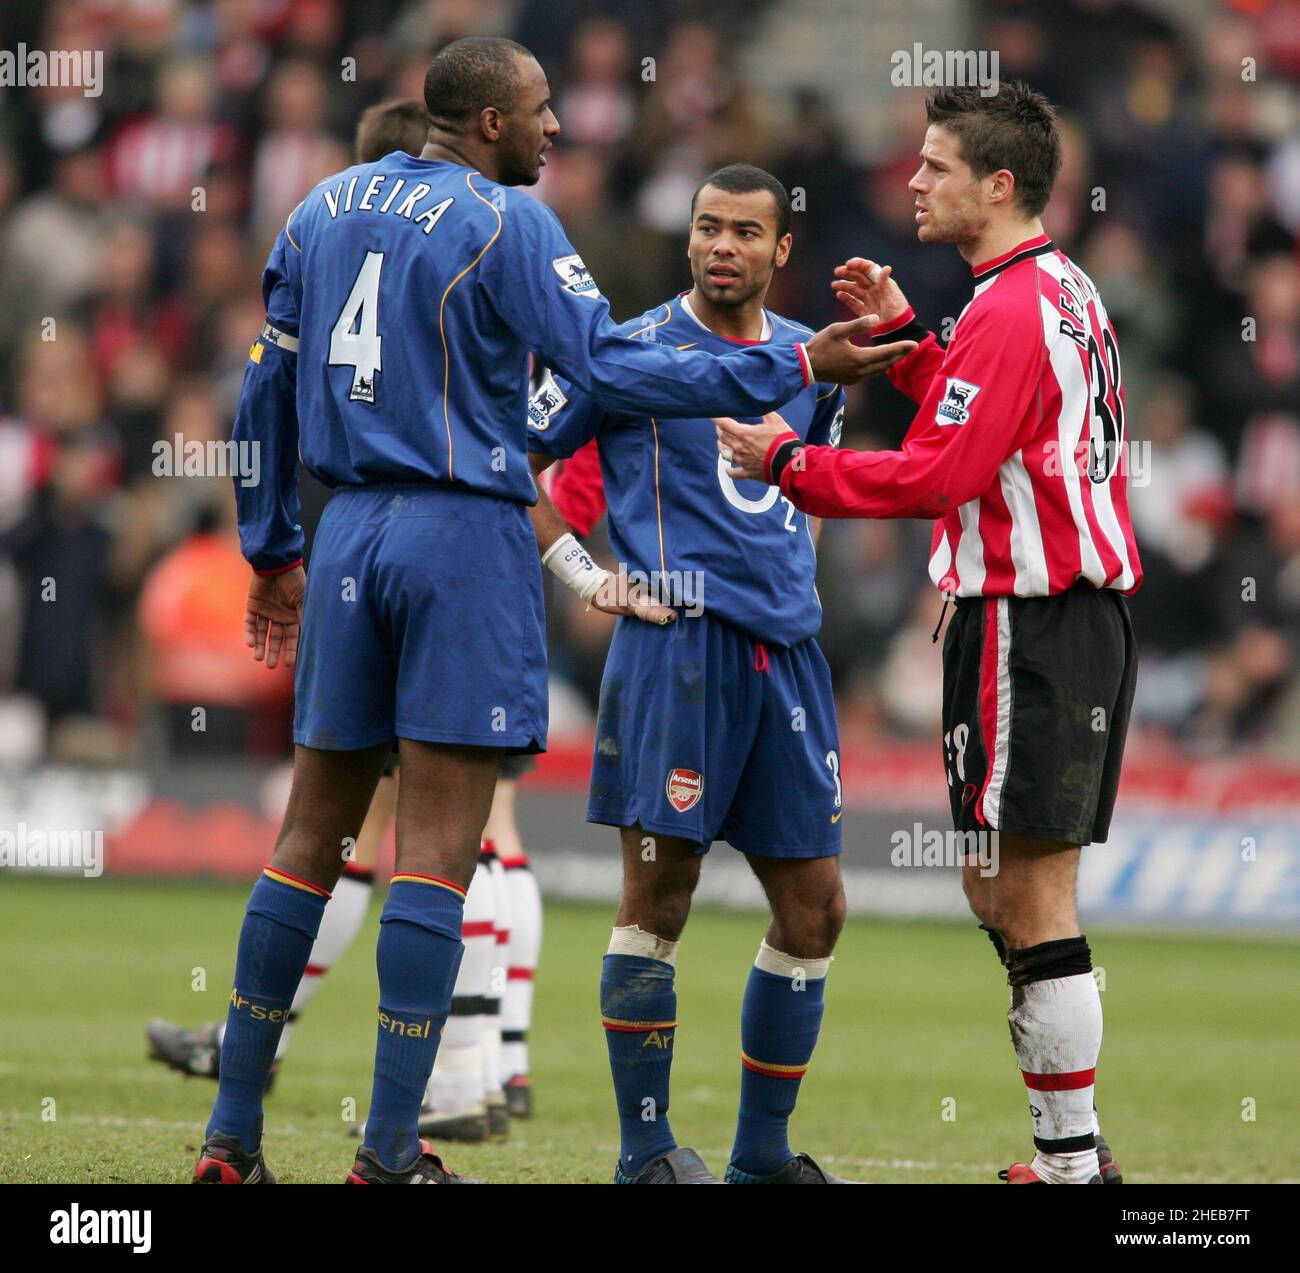 Arsenal v Southampton at St Marys Stadium . 26TH FEB 05 SCORE 1-1  JAMIE REDKNAPP and  PATRICK VIEIRA is disagreement. Normal Data Co premier league usages apply.This image is bound by Dataco restrictions on how it can be used. EDITORIAL USE ONLY No use with unauthorised audio, video, data, fixture lists, club/league logos or “live” services. Online in-match use limited to 120 images, no video emulation. No use in betting, games or single club/league/player publications Stock Photo